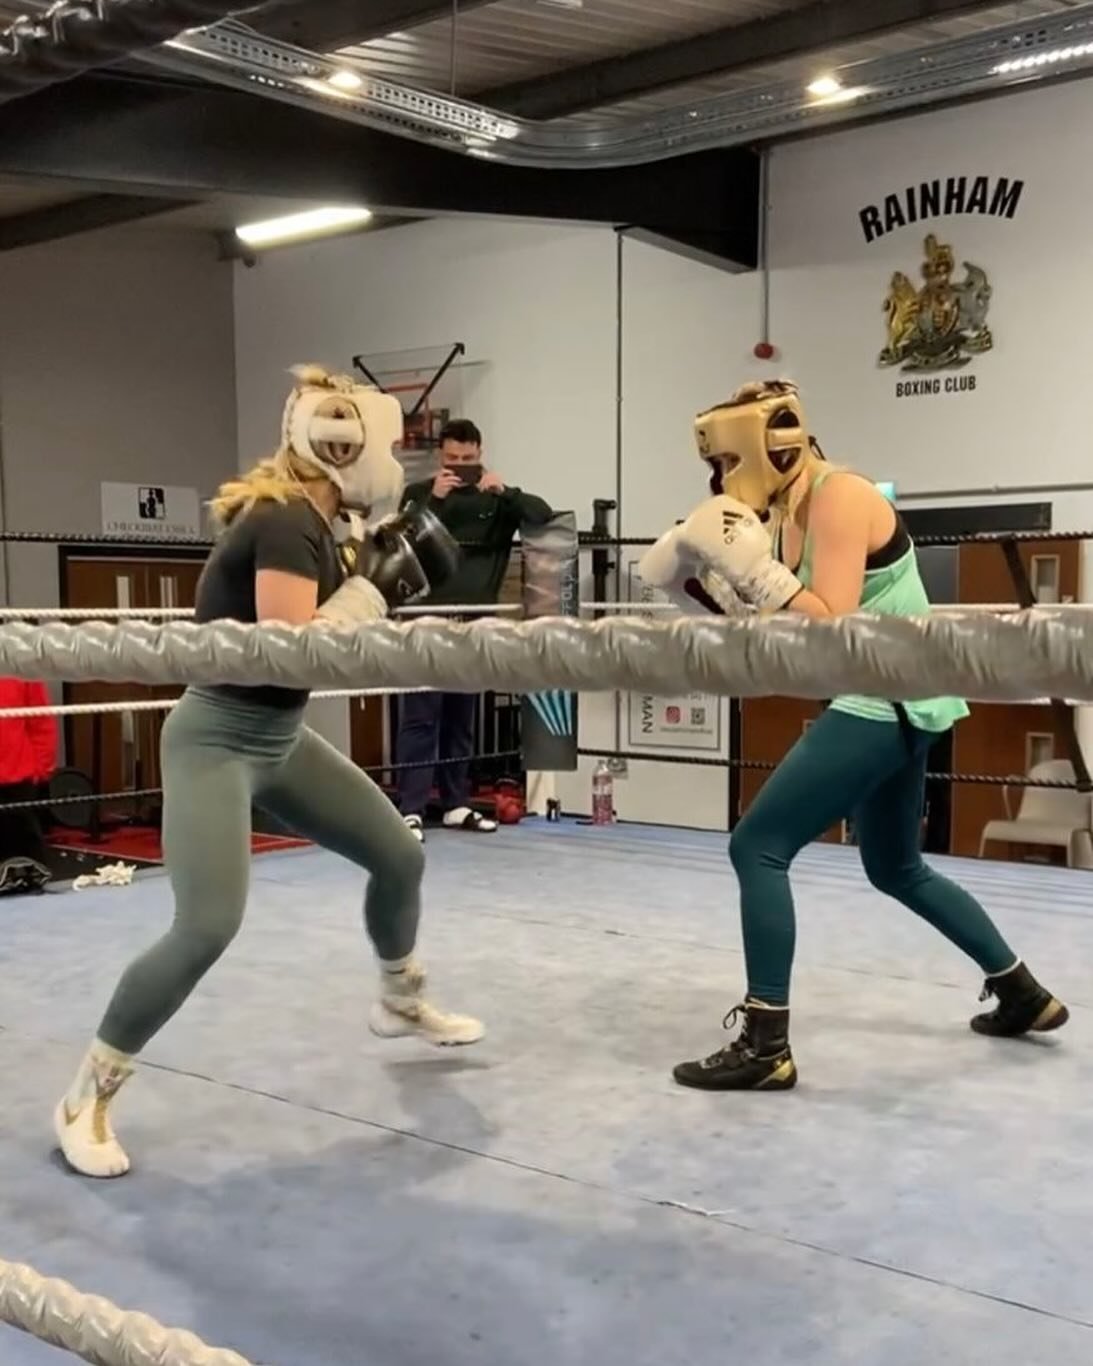 𝐒𝐔𝐓𝐓𝐎𝐍 🤝 𝐁𝐑𝐎𝐎𝐊𝐄

Bristol&rsquo;s @xxCharlie_Suttonxx travelled to Mark Tibbs&rsquo; gym in Rainham today to get some valuable sparring rounds in with @MisfitsBoxing star Elle Brooke 👊🏼